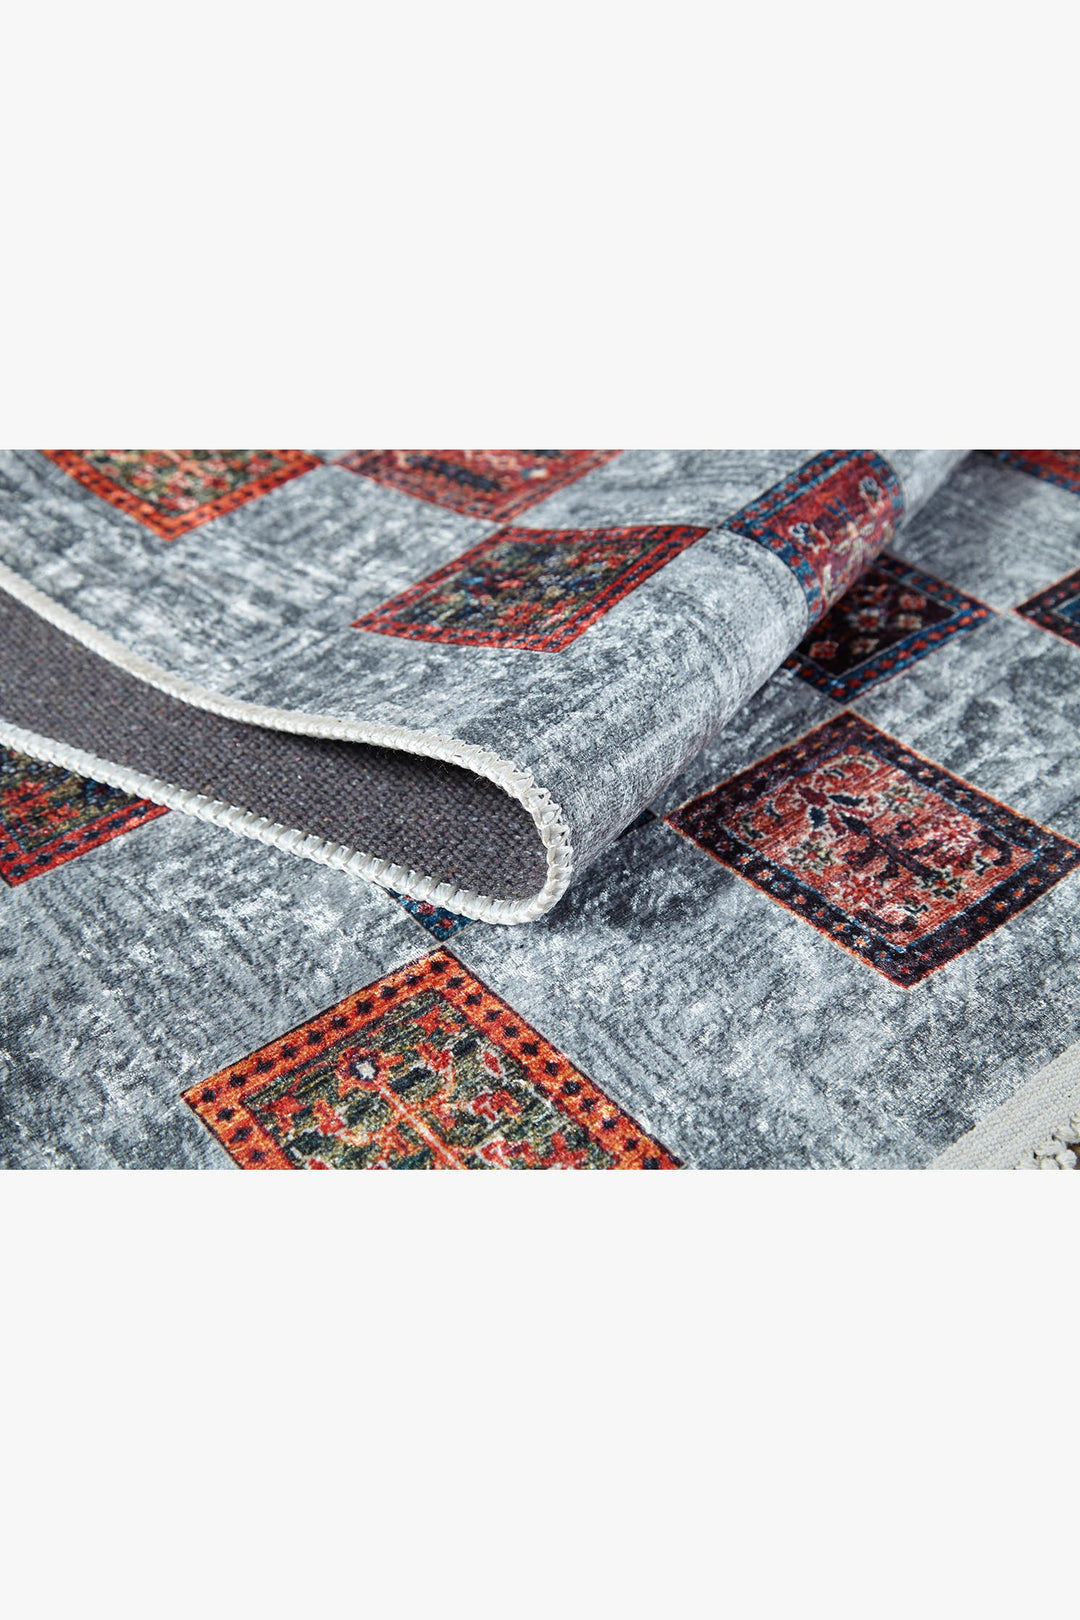 machine-washable-area-rug-Braided-Tassel-Collection-Gray-Anthracite-Red-JR5024